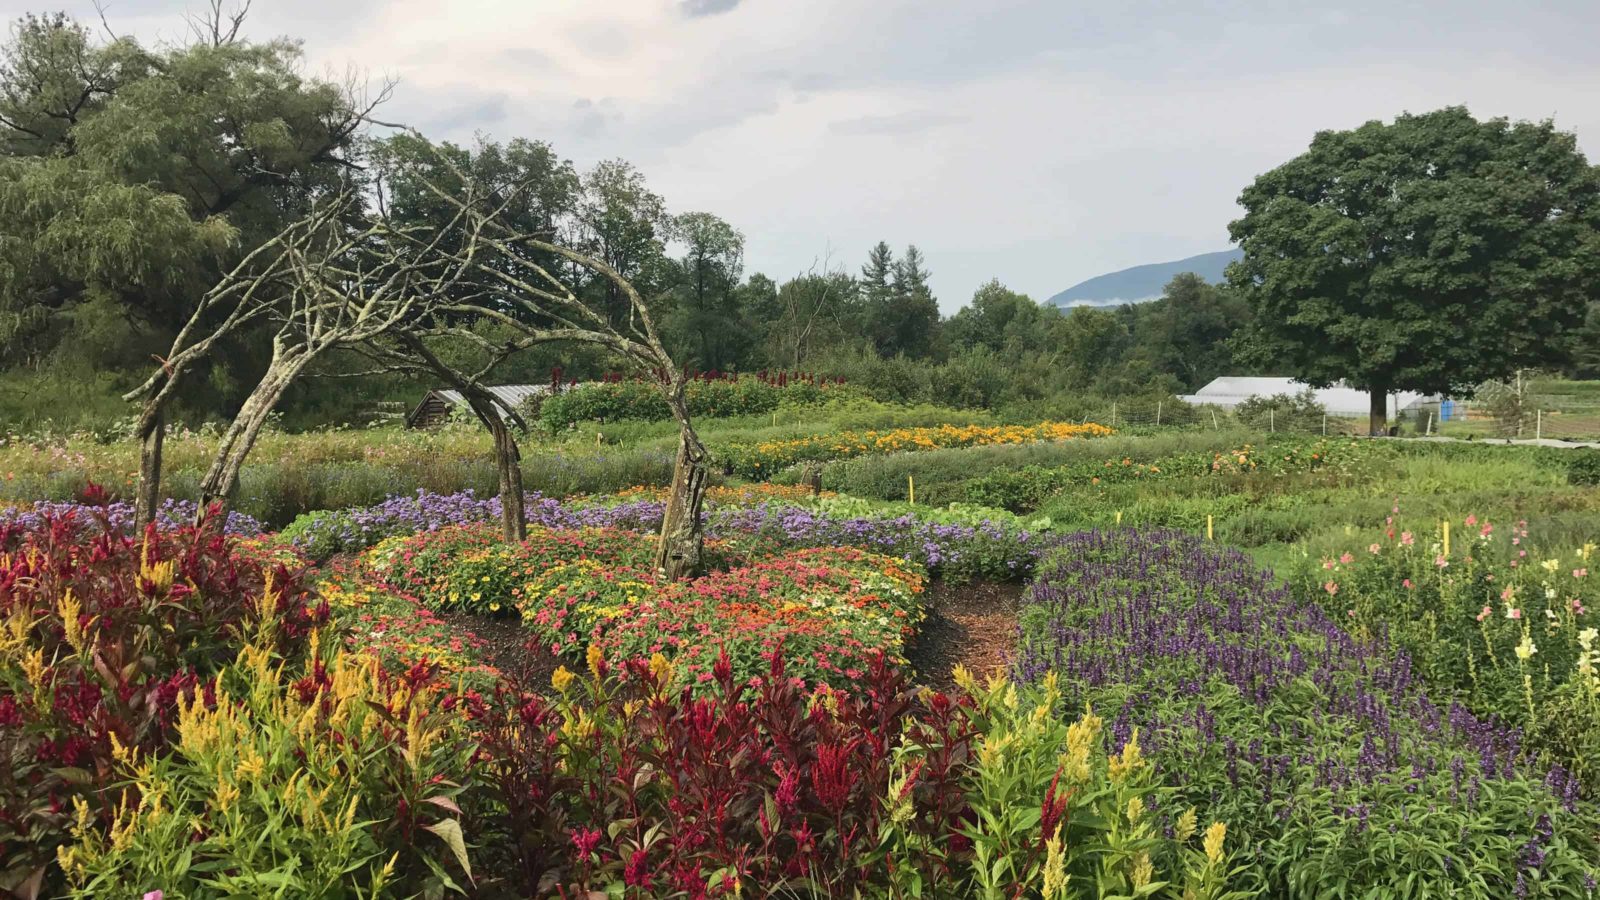 The flower gardens bloom in rich reds and purple and gold at Caretaker Farm in Williamstown.